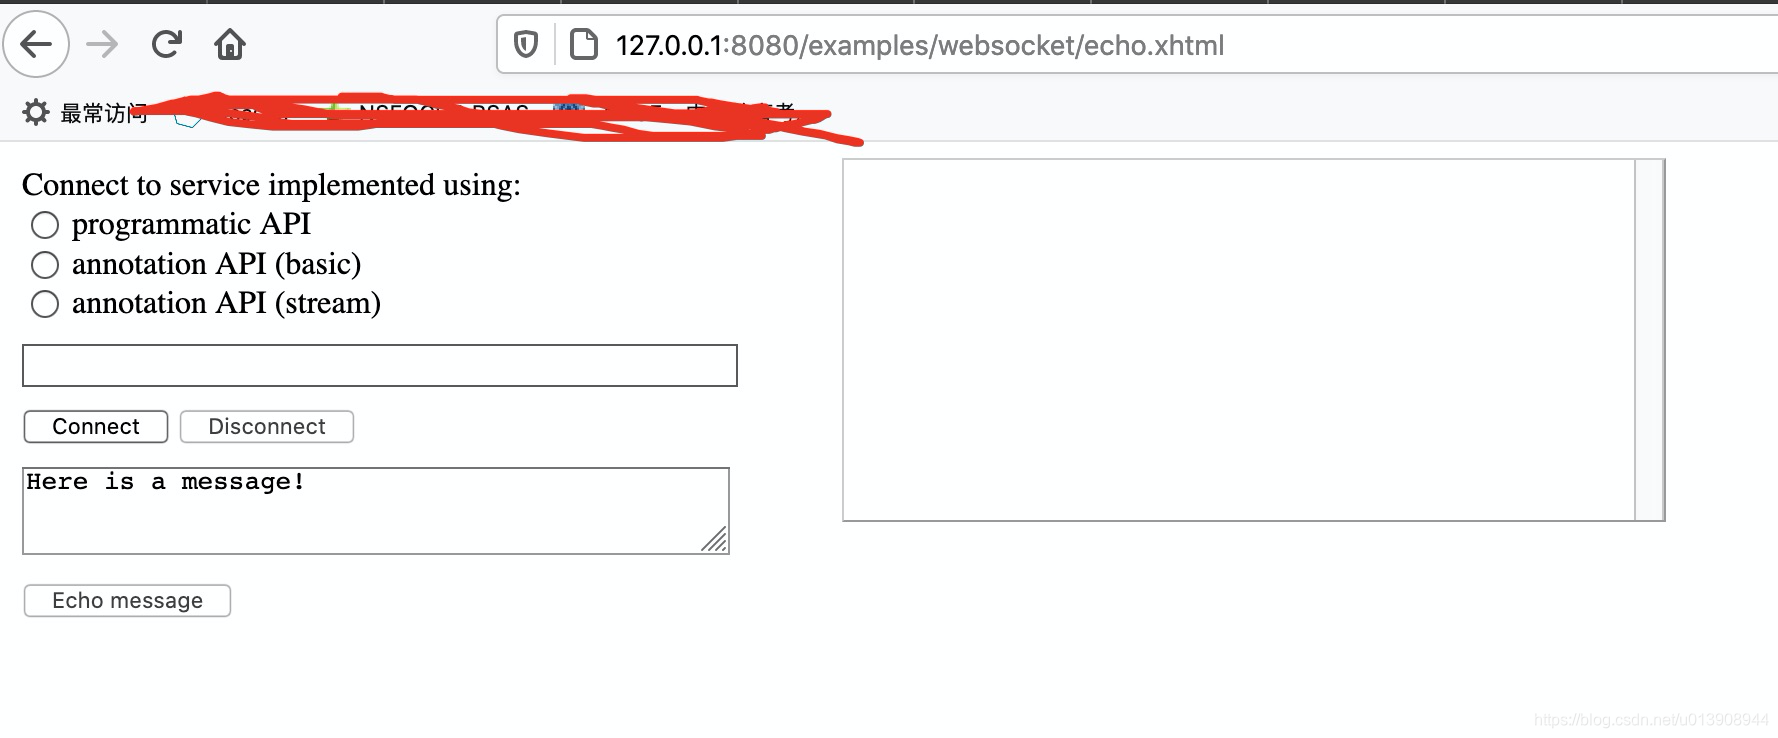 Page with websocket - vulnerability url